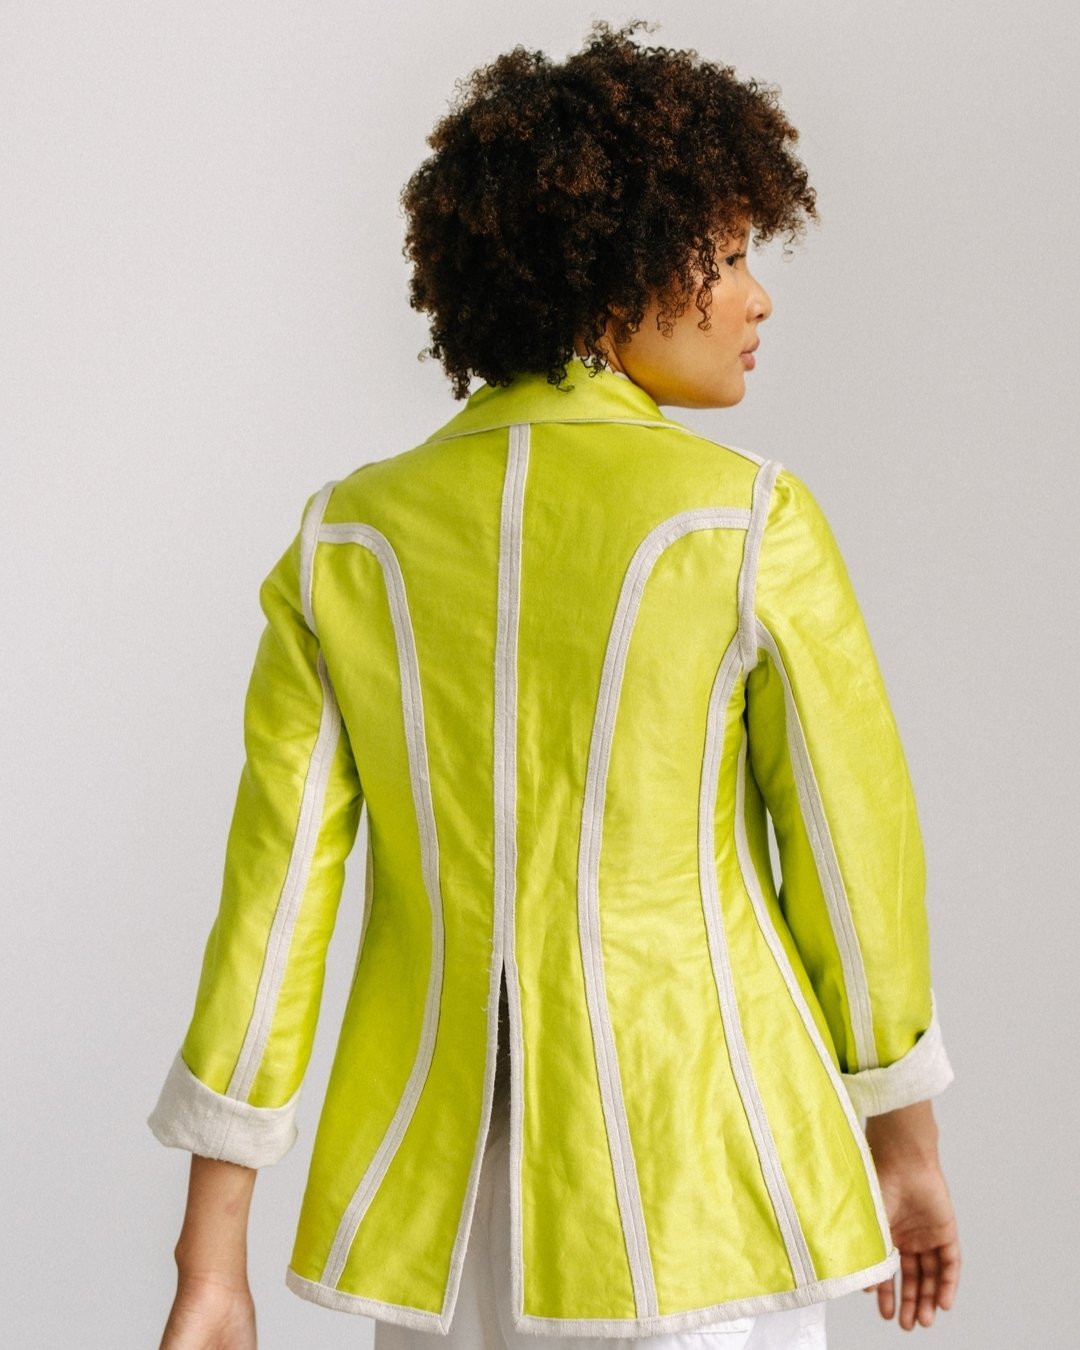 An elegant yellow with a touch of neon calls attention to the structure of this classic blazer. The crisp lines slim the figure while beautifully finishing the edges to make the reversibility possible. Designed to be timeless. 

#sustainablebrand #up